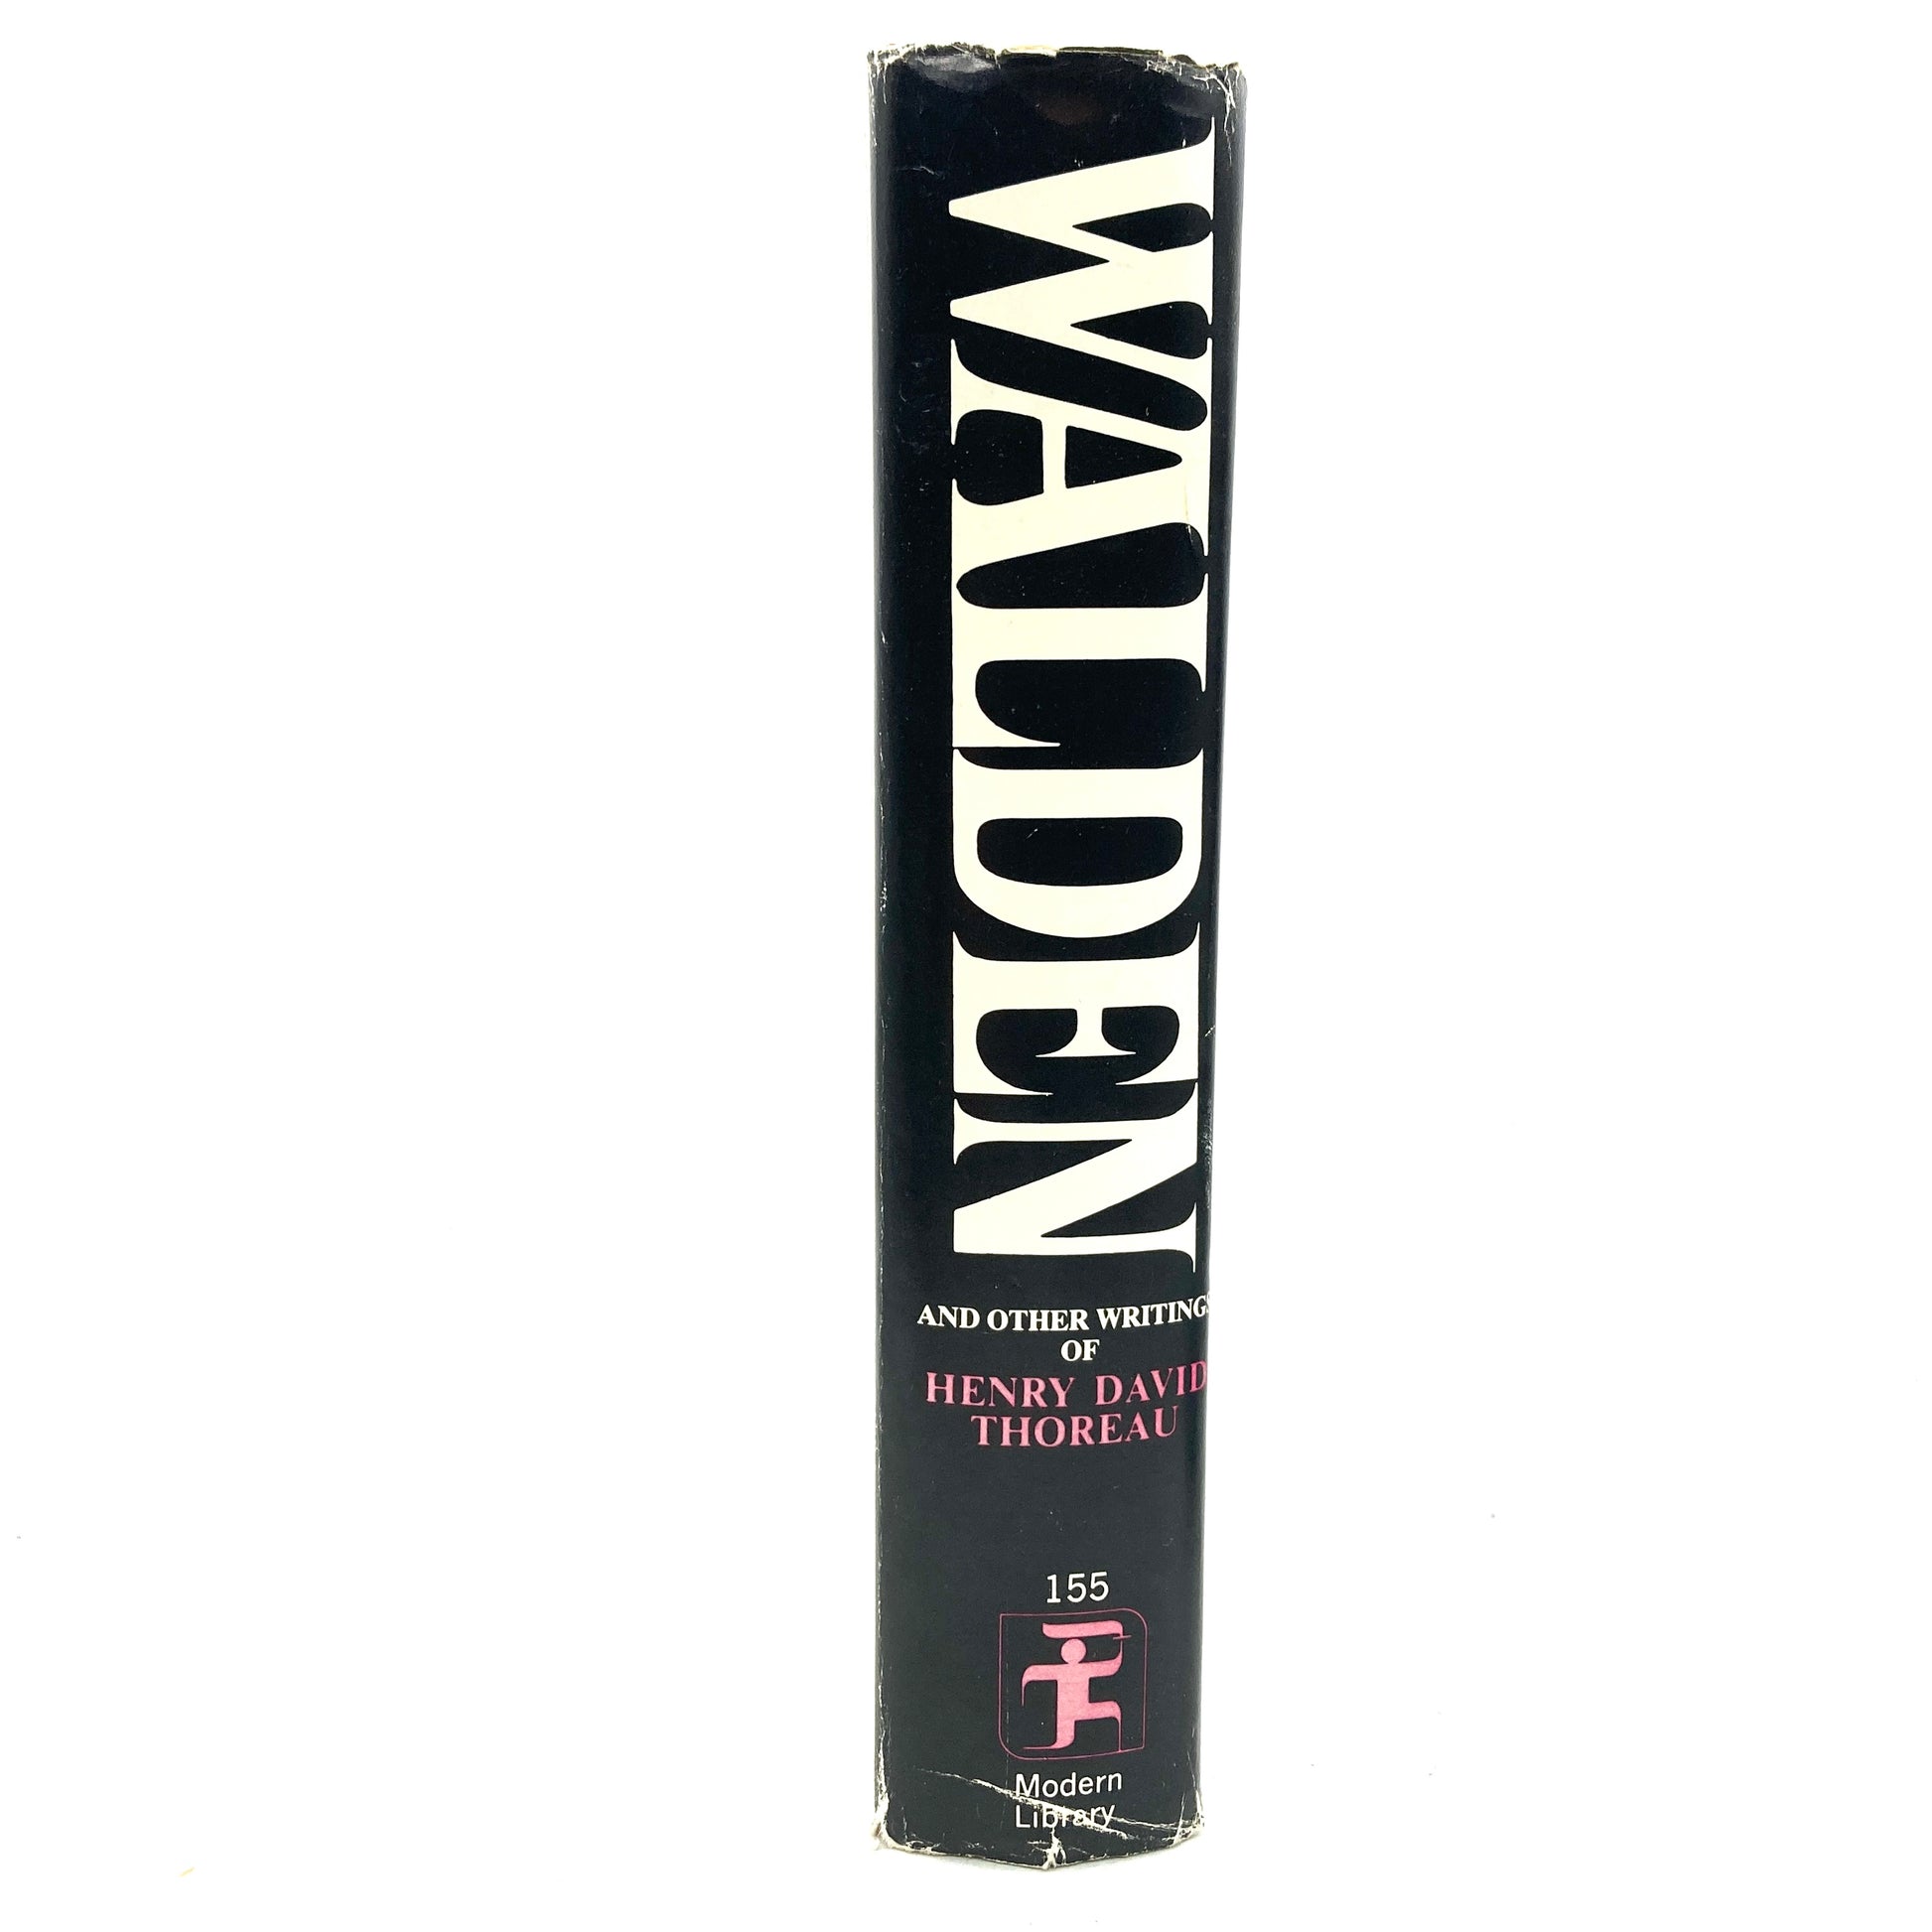 THOREAU, Henry David "Walden and Other Writings" [Modern Library, 1965] - Buzz Bookstore